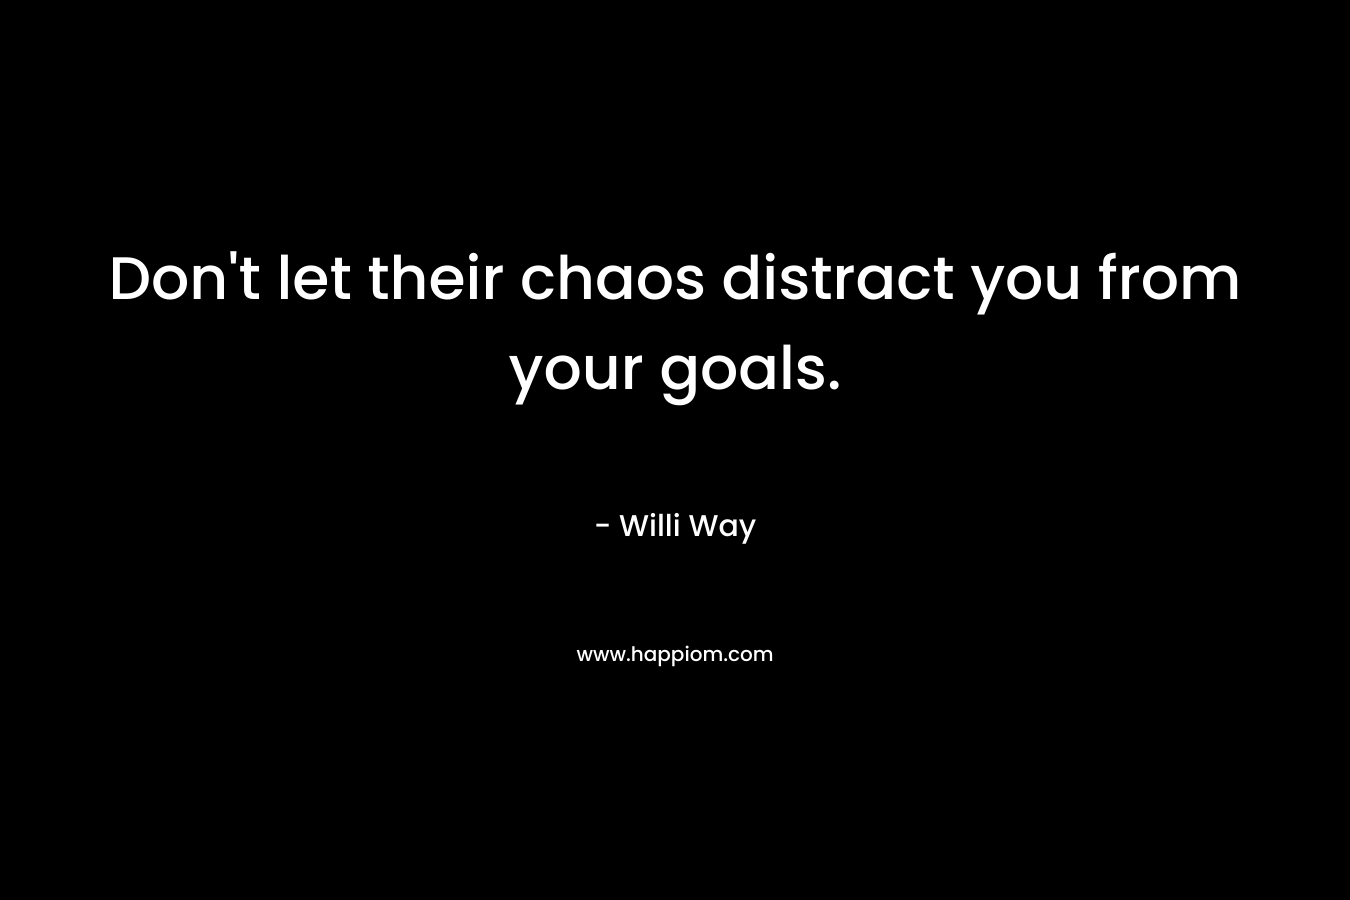 Don’t let their chaos distract you from your goals. – Willi Way